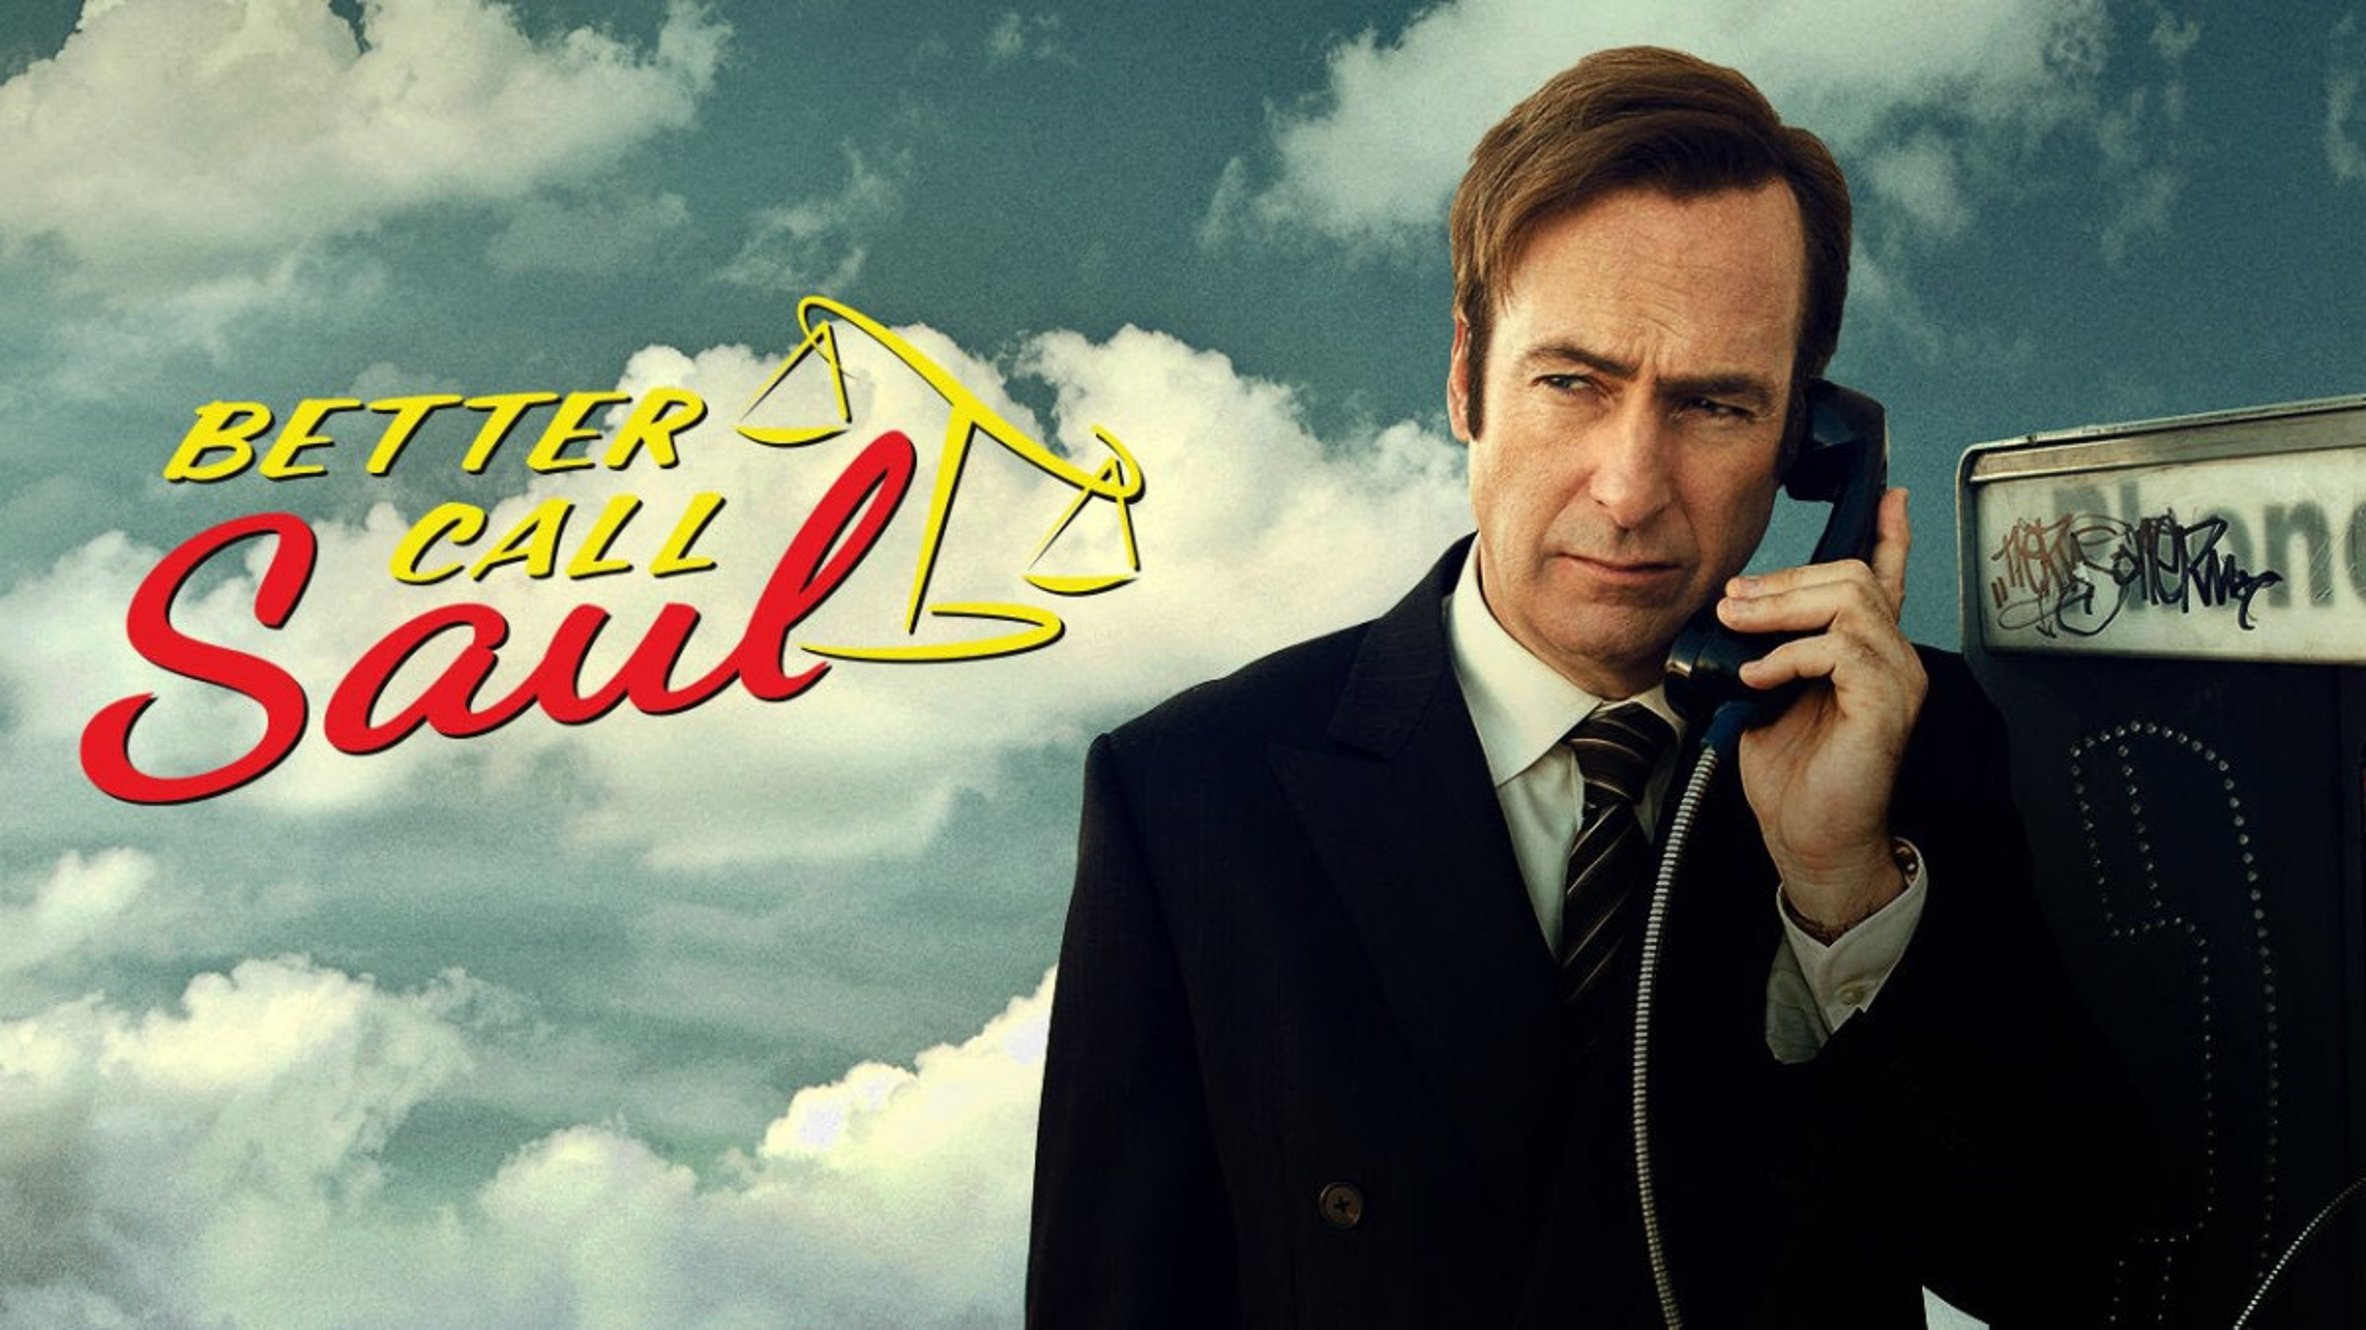 Better Call Saul Casting College Student Roles